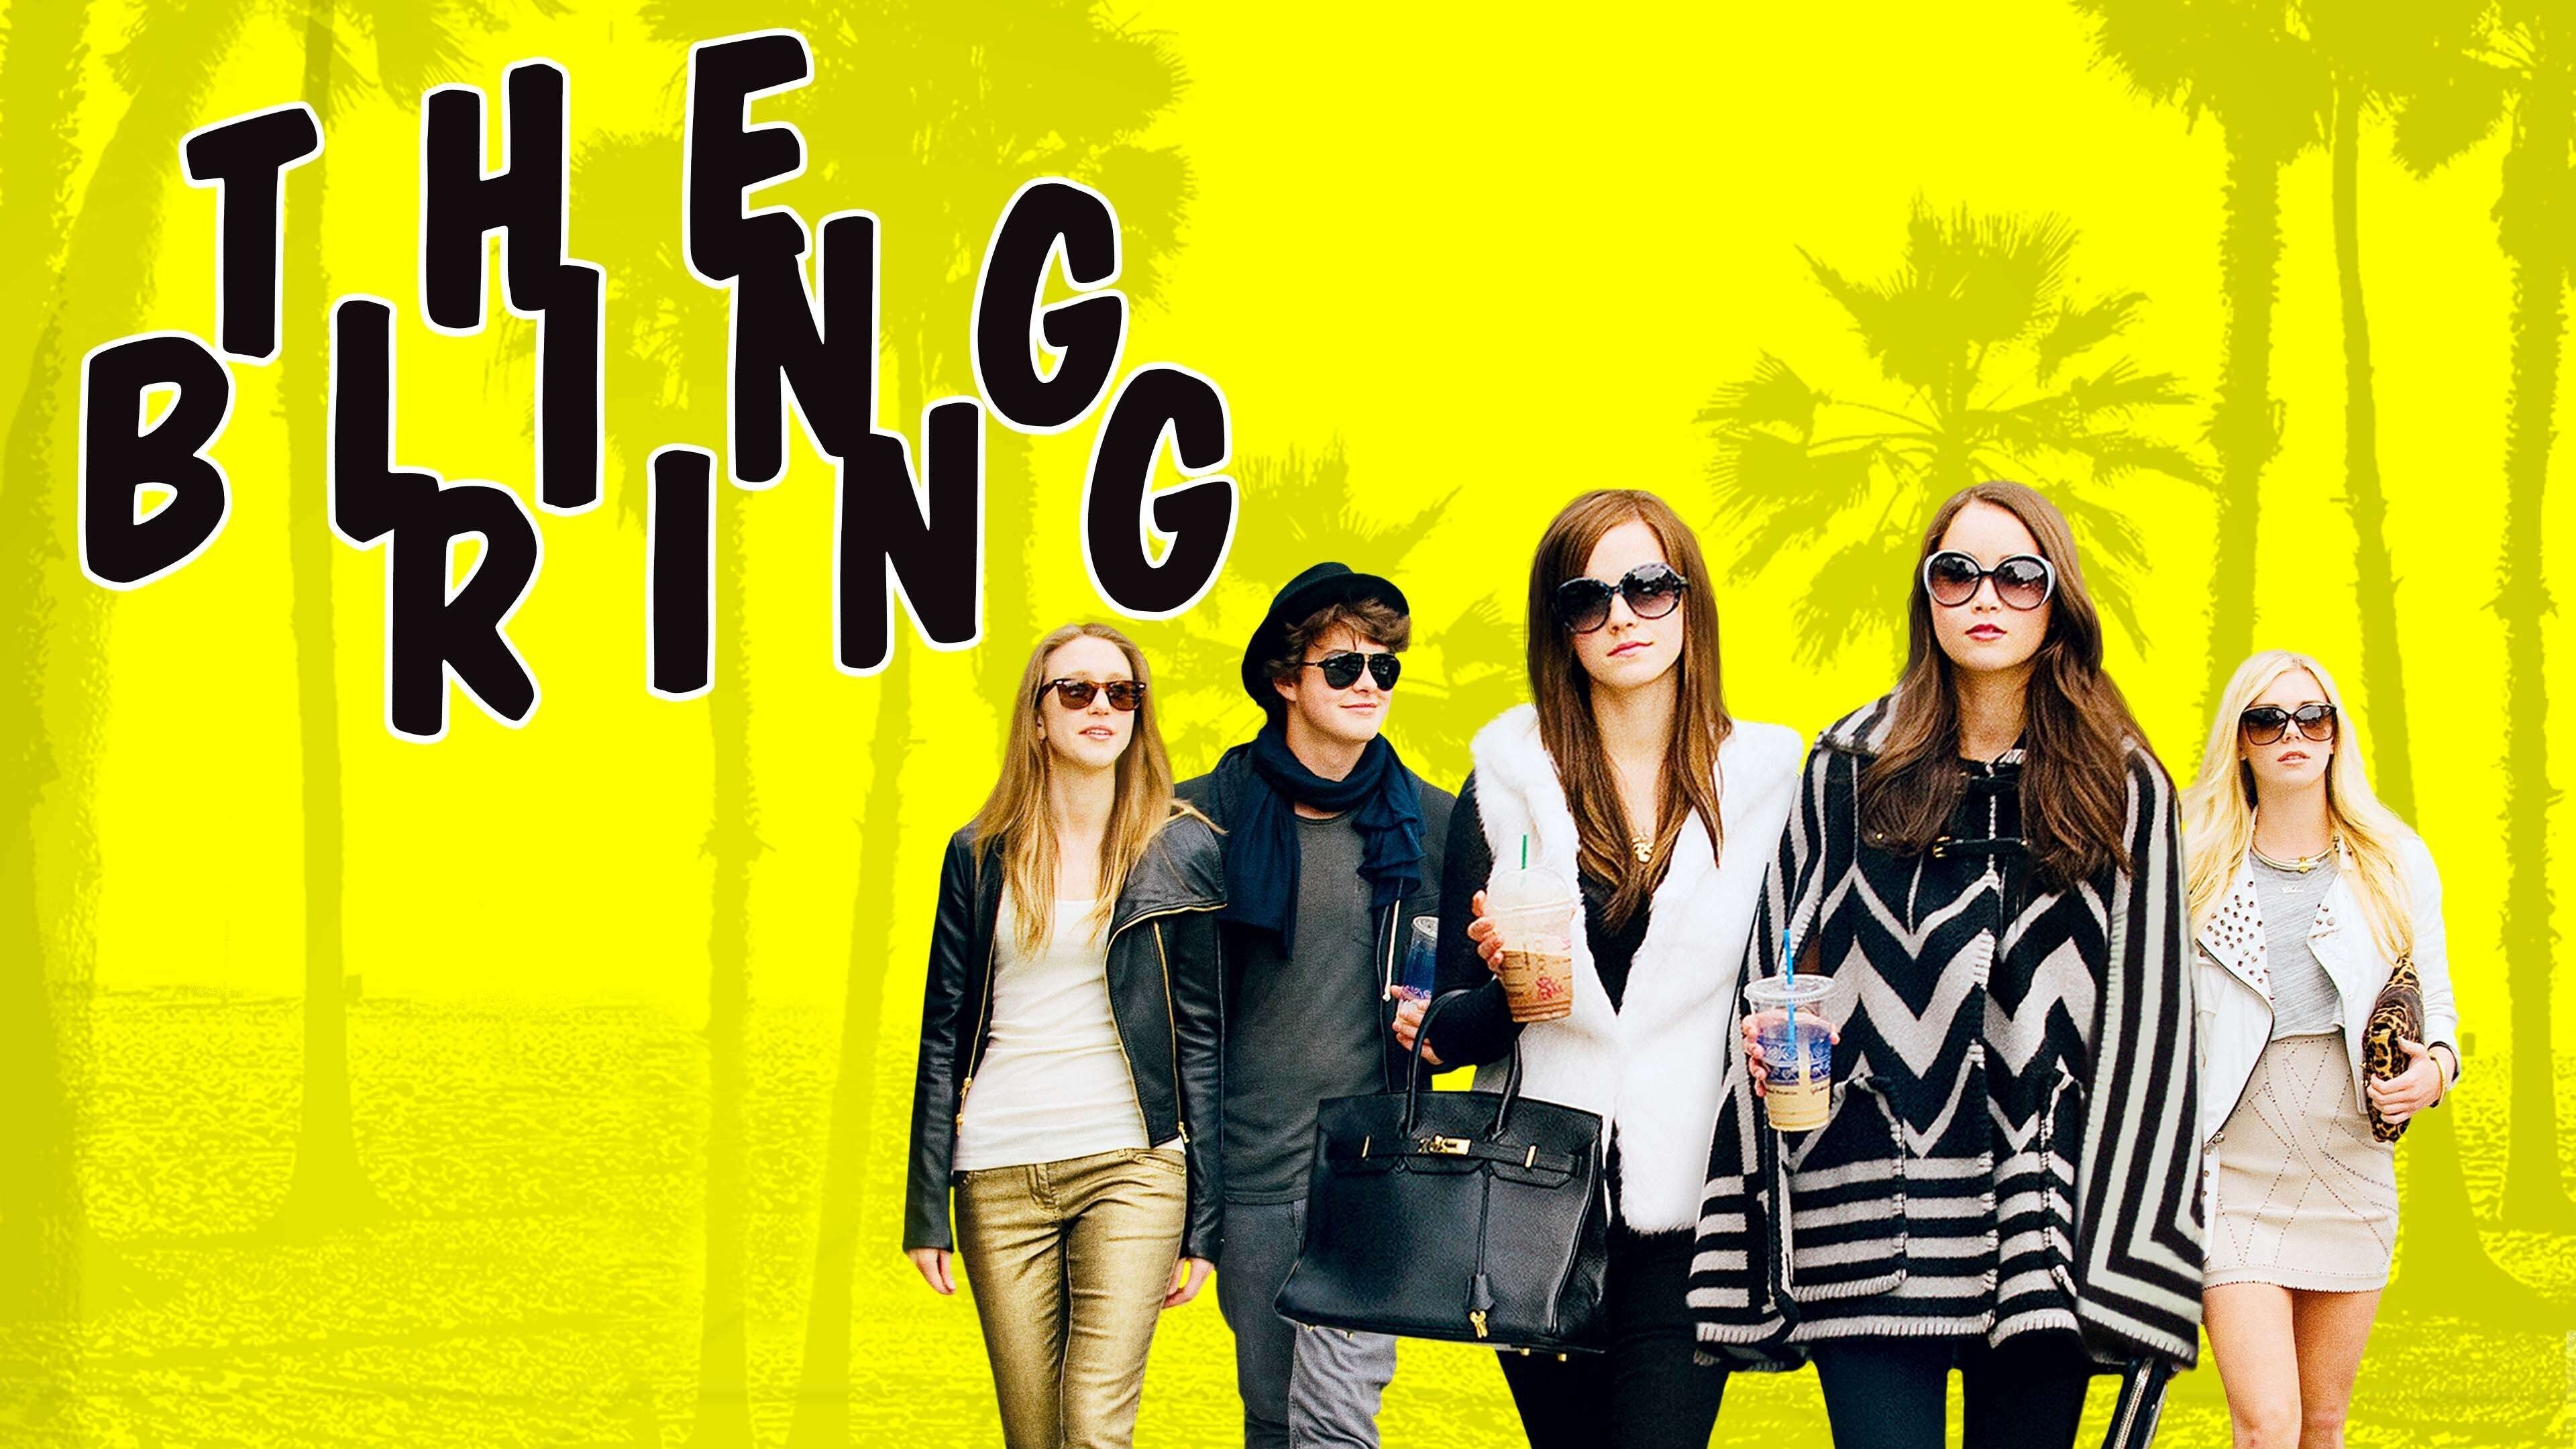 The Bling Ring is Pretty Wild :: All Things Andy Gavin